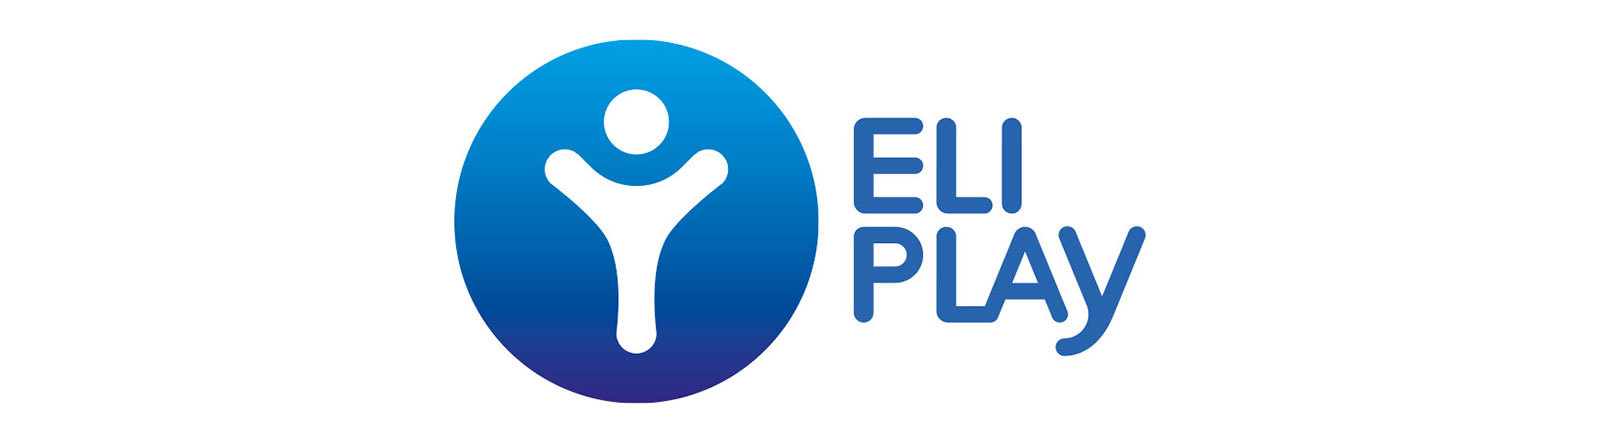 New logo ELI Play, manufacturer indoor playgrounds and trampolineparks